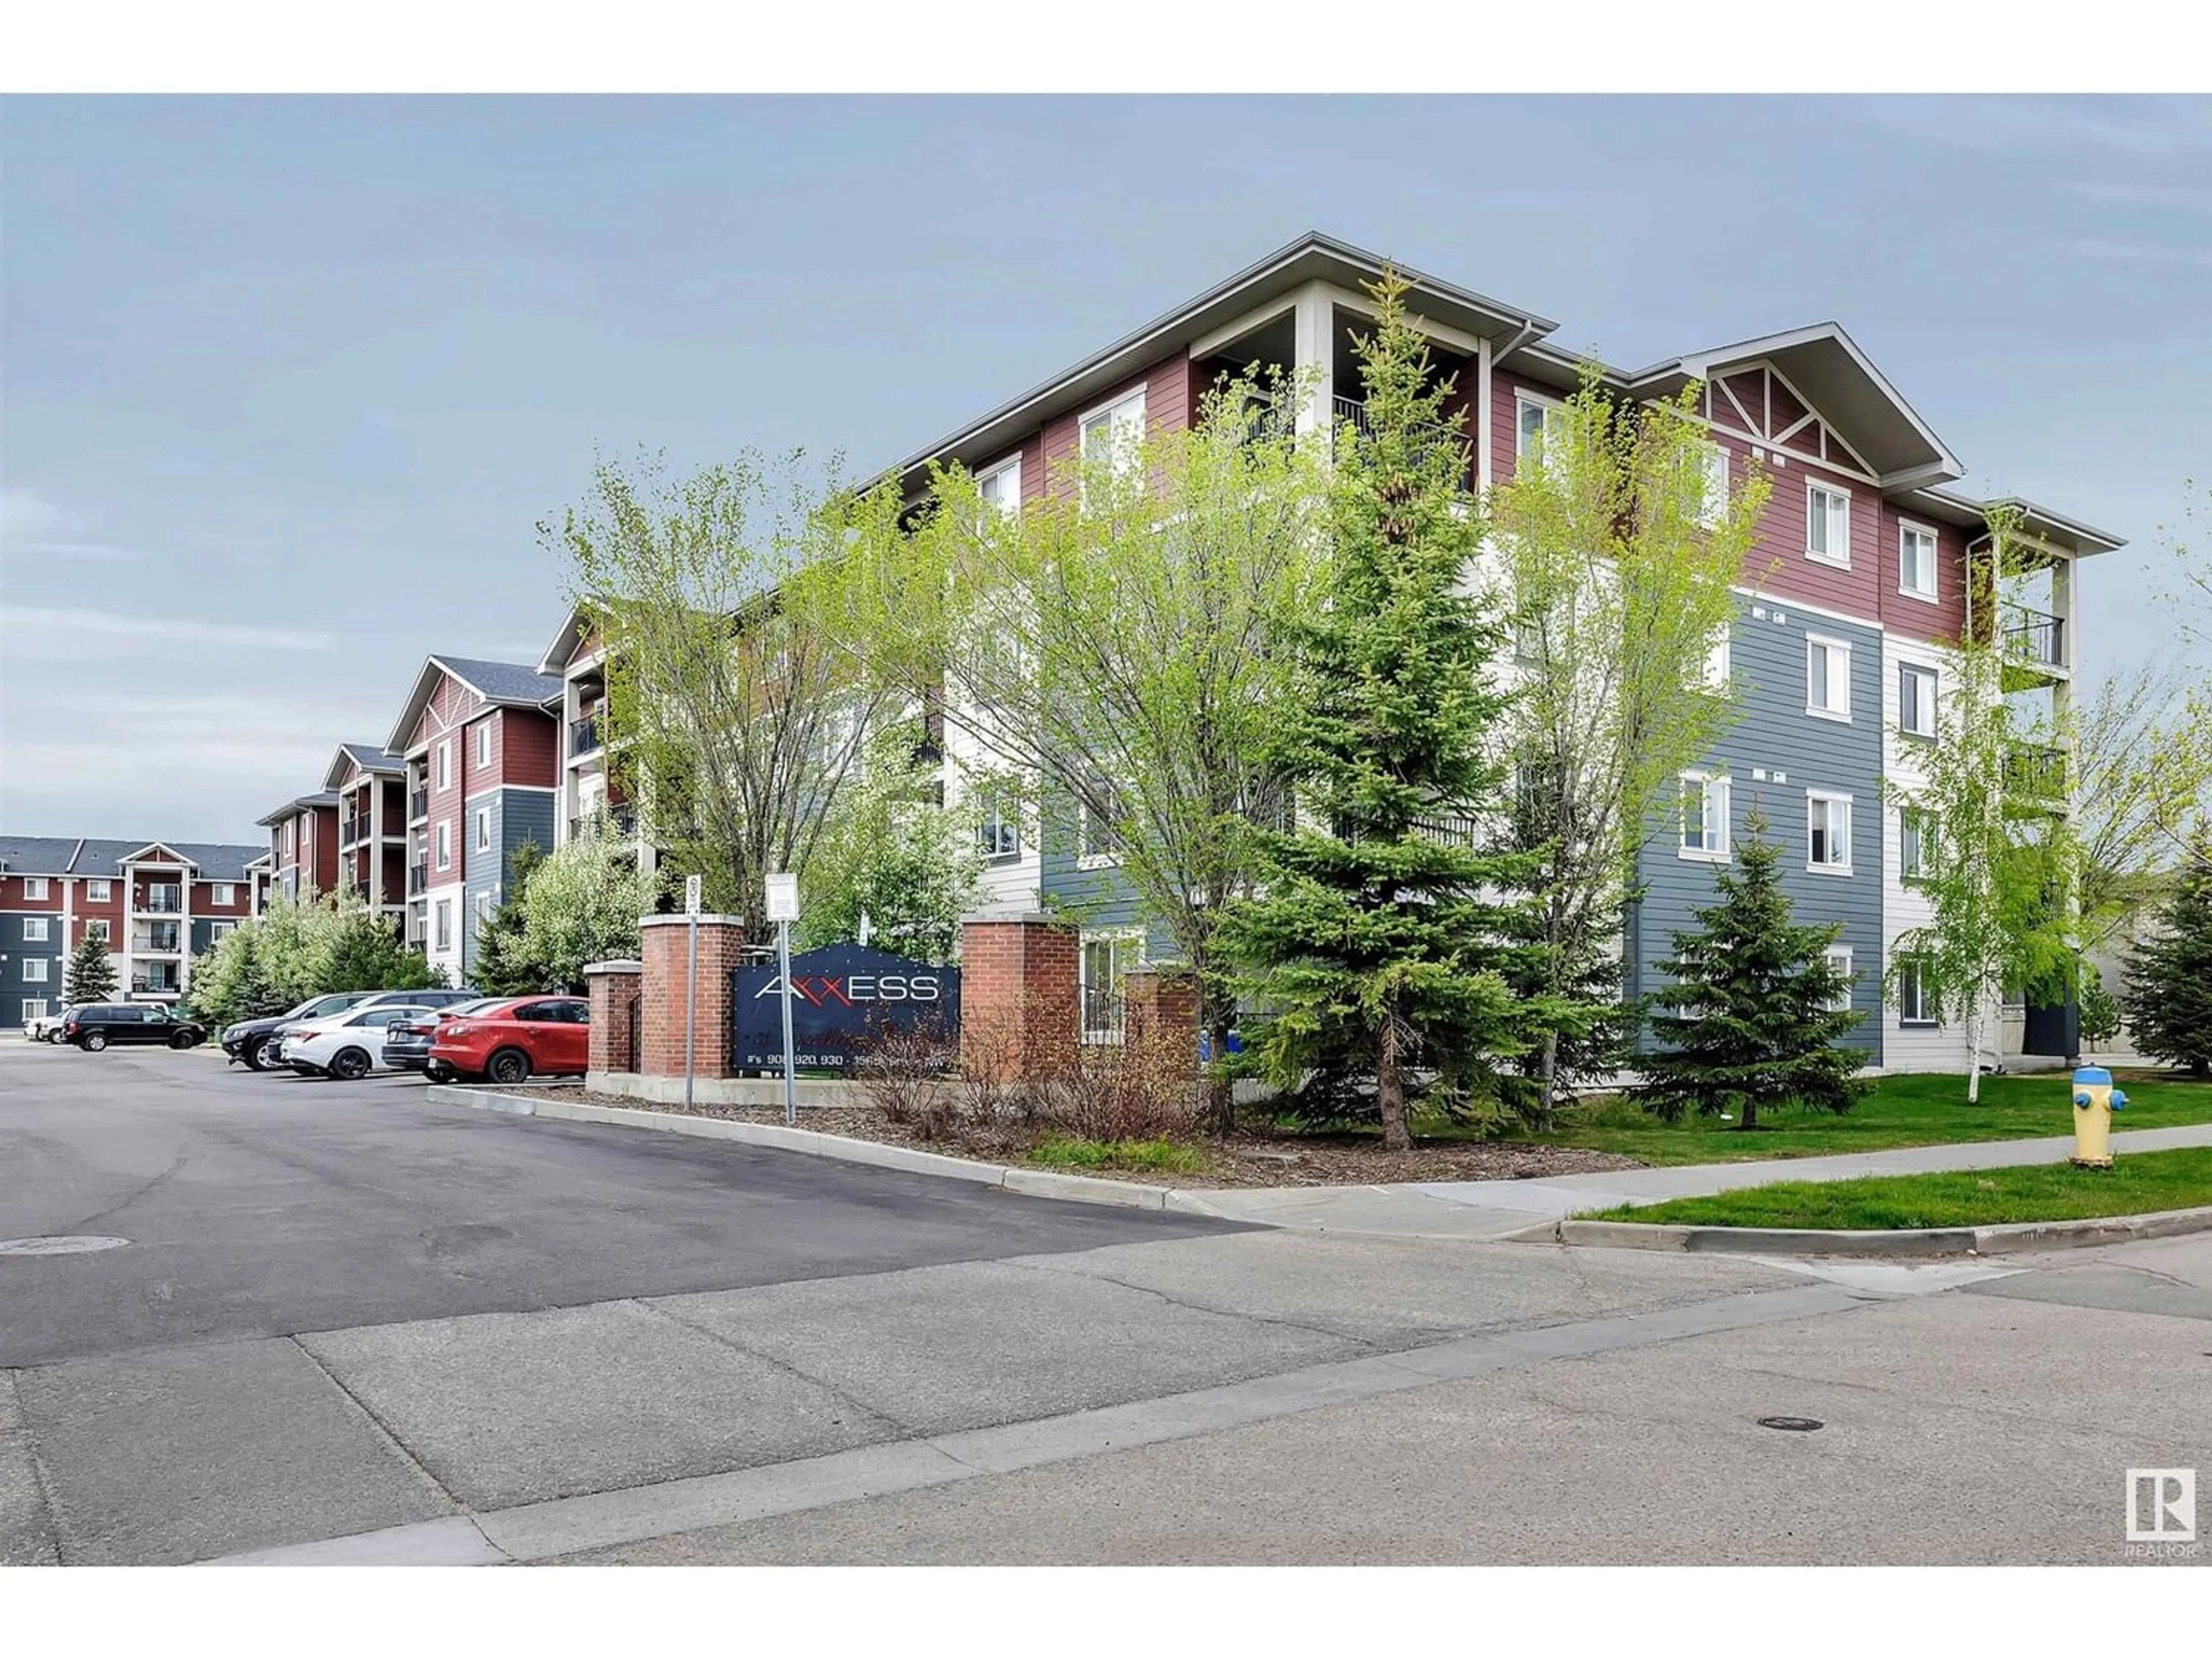 A pic from exterior of the house or condo for #404 920 156 ST NW, Edmonton Alberta T6R0N6